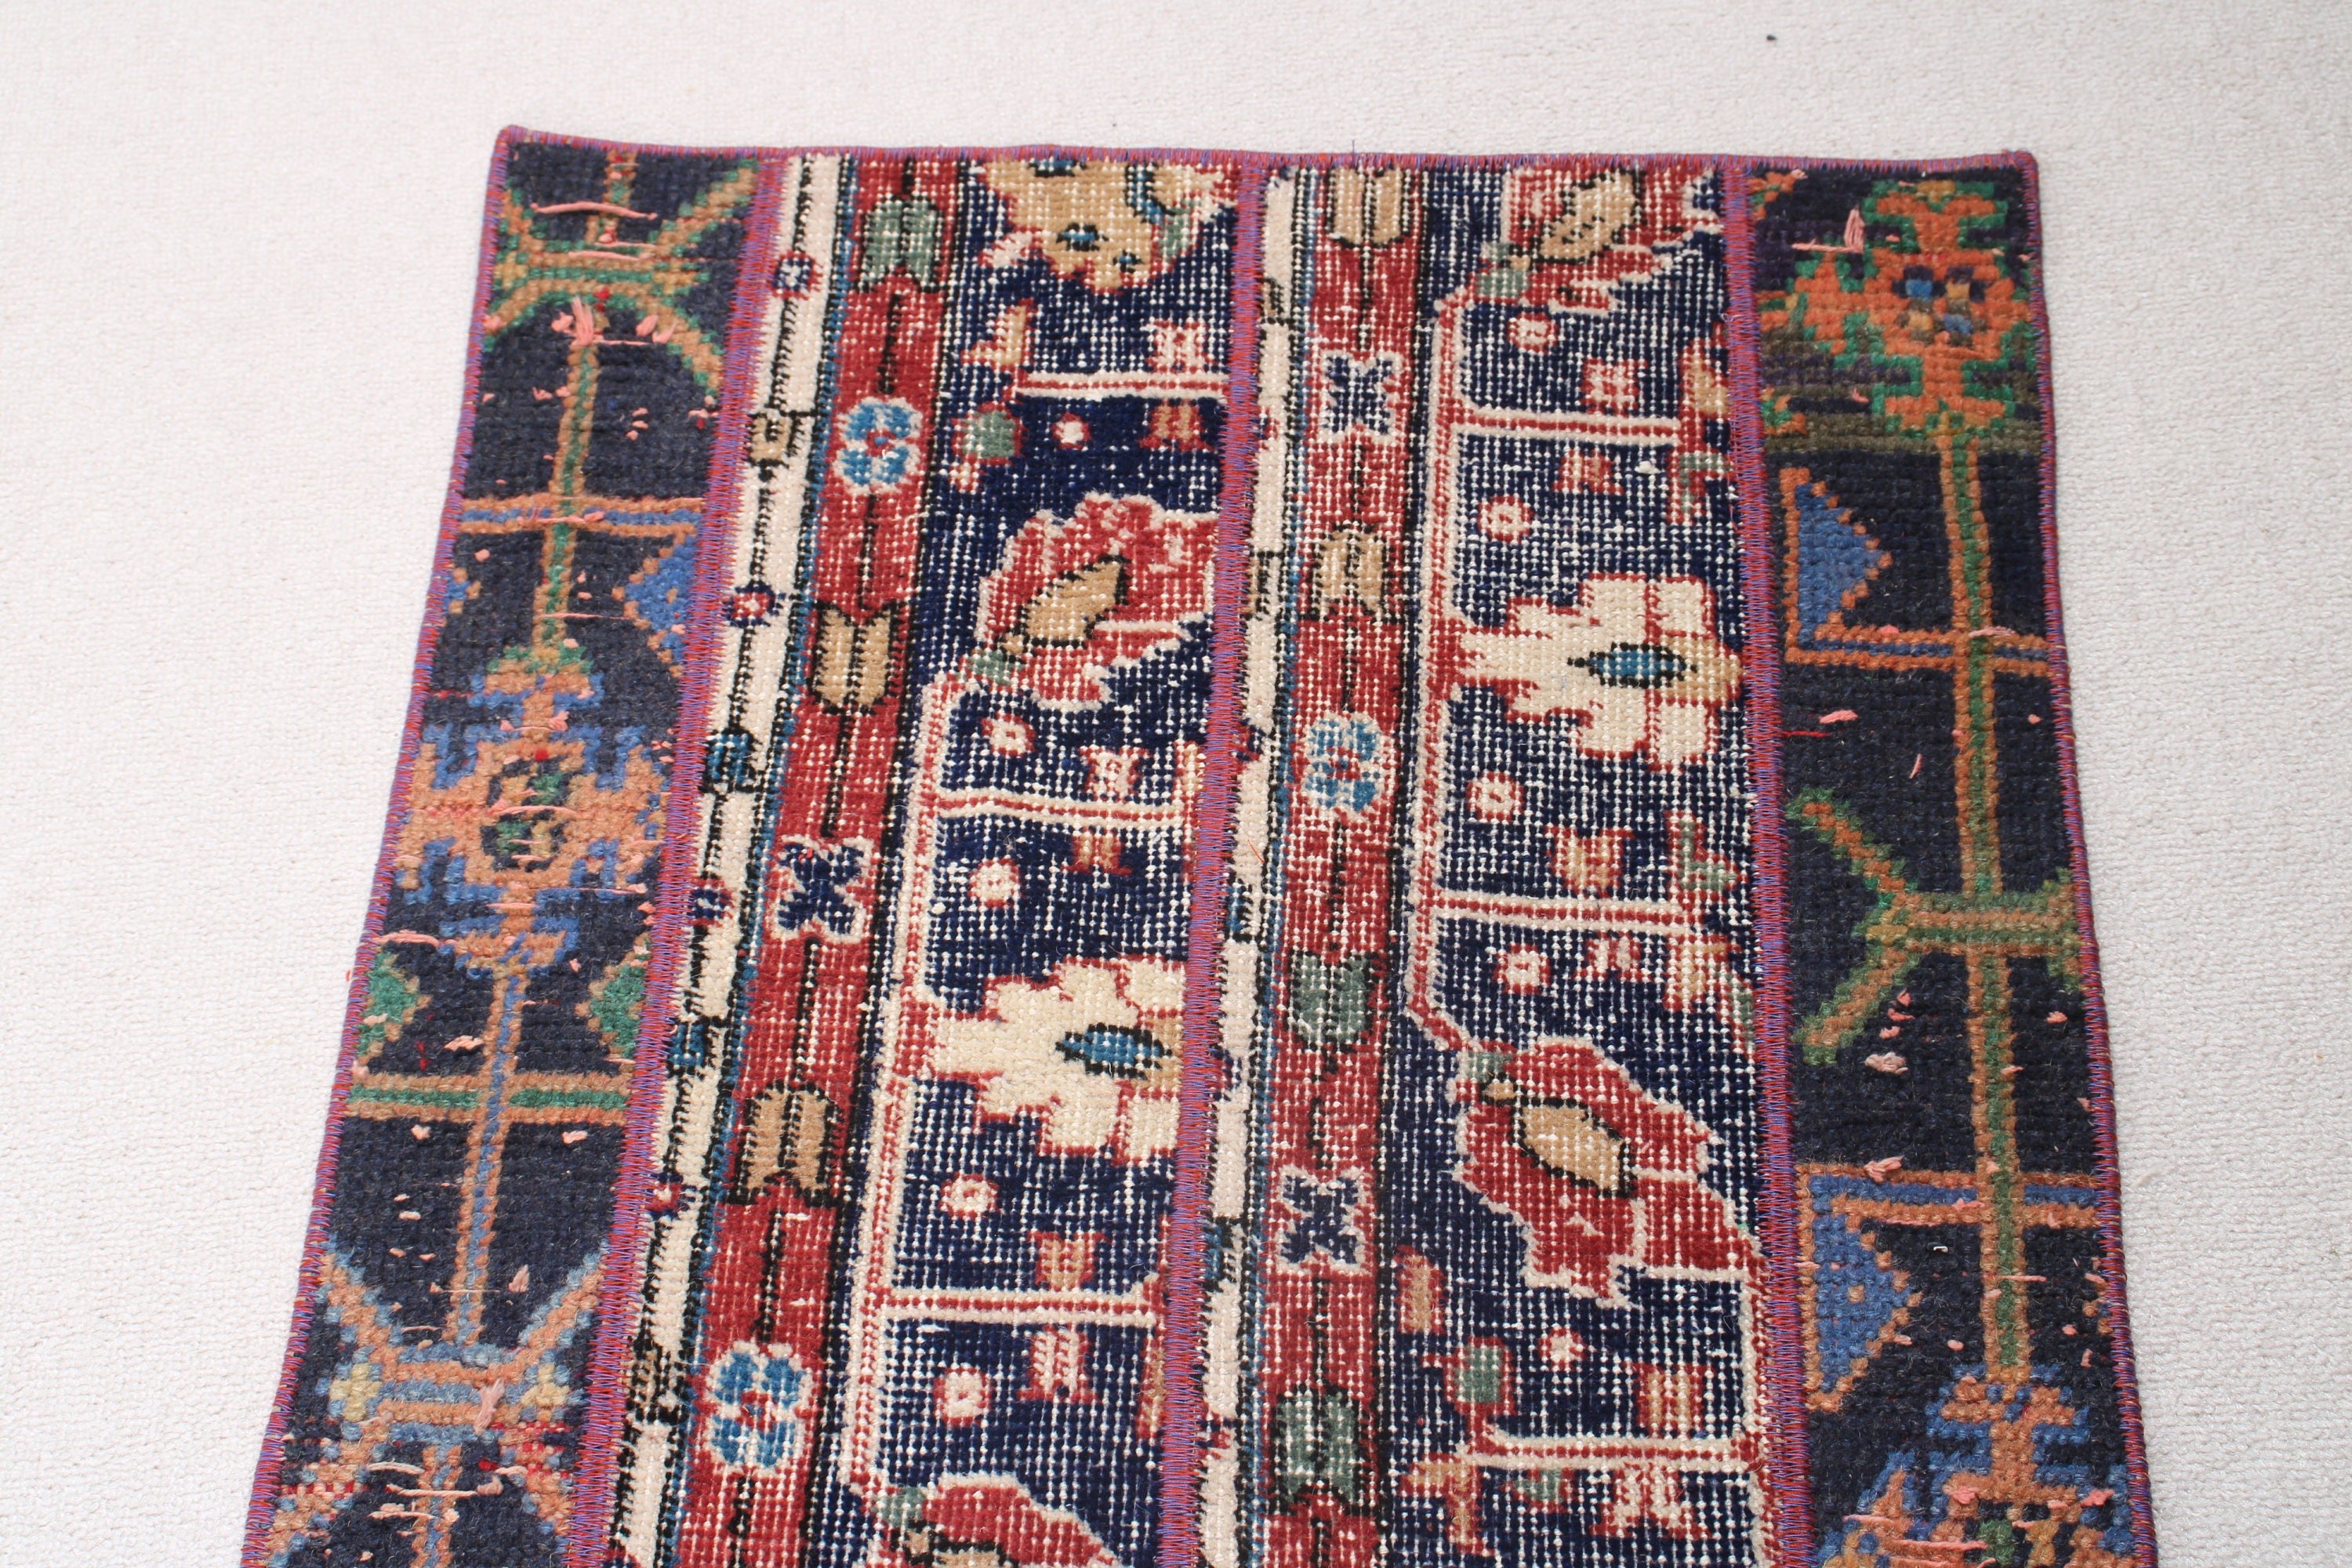 Kitchen Rug, Wall Hanging Rugs, Turkish Rug, Vintage Rug, Blue Moroccan Rug, Muted Rug, Moroccan Rug, 1.9x2.9 ft Small Rug, Antique Rug